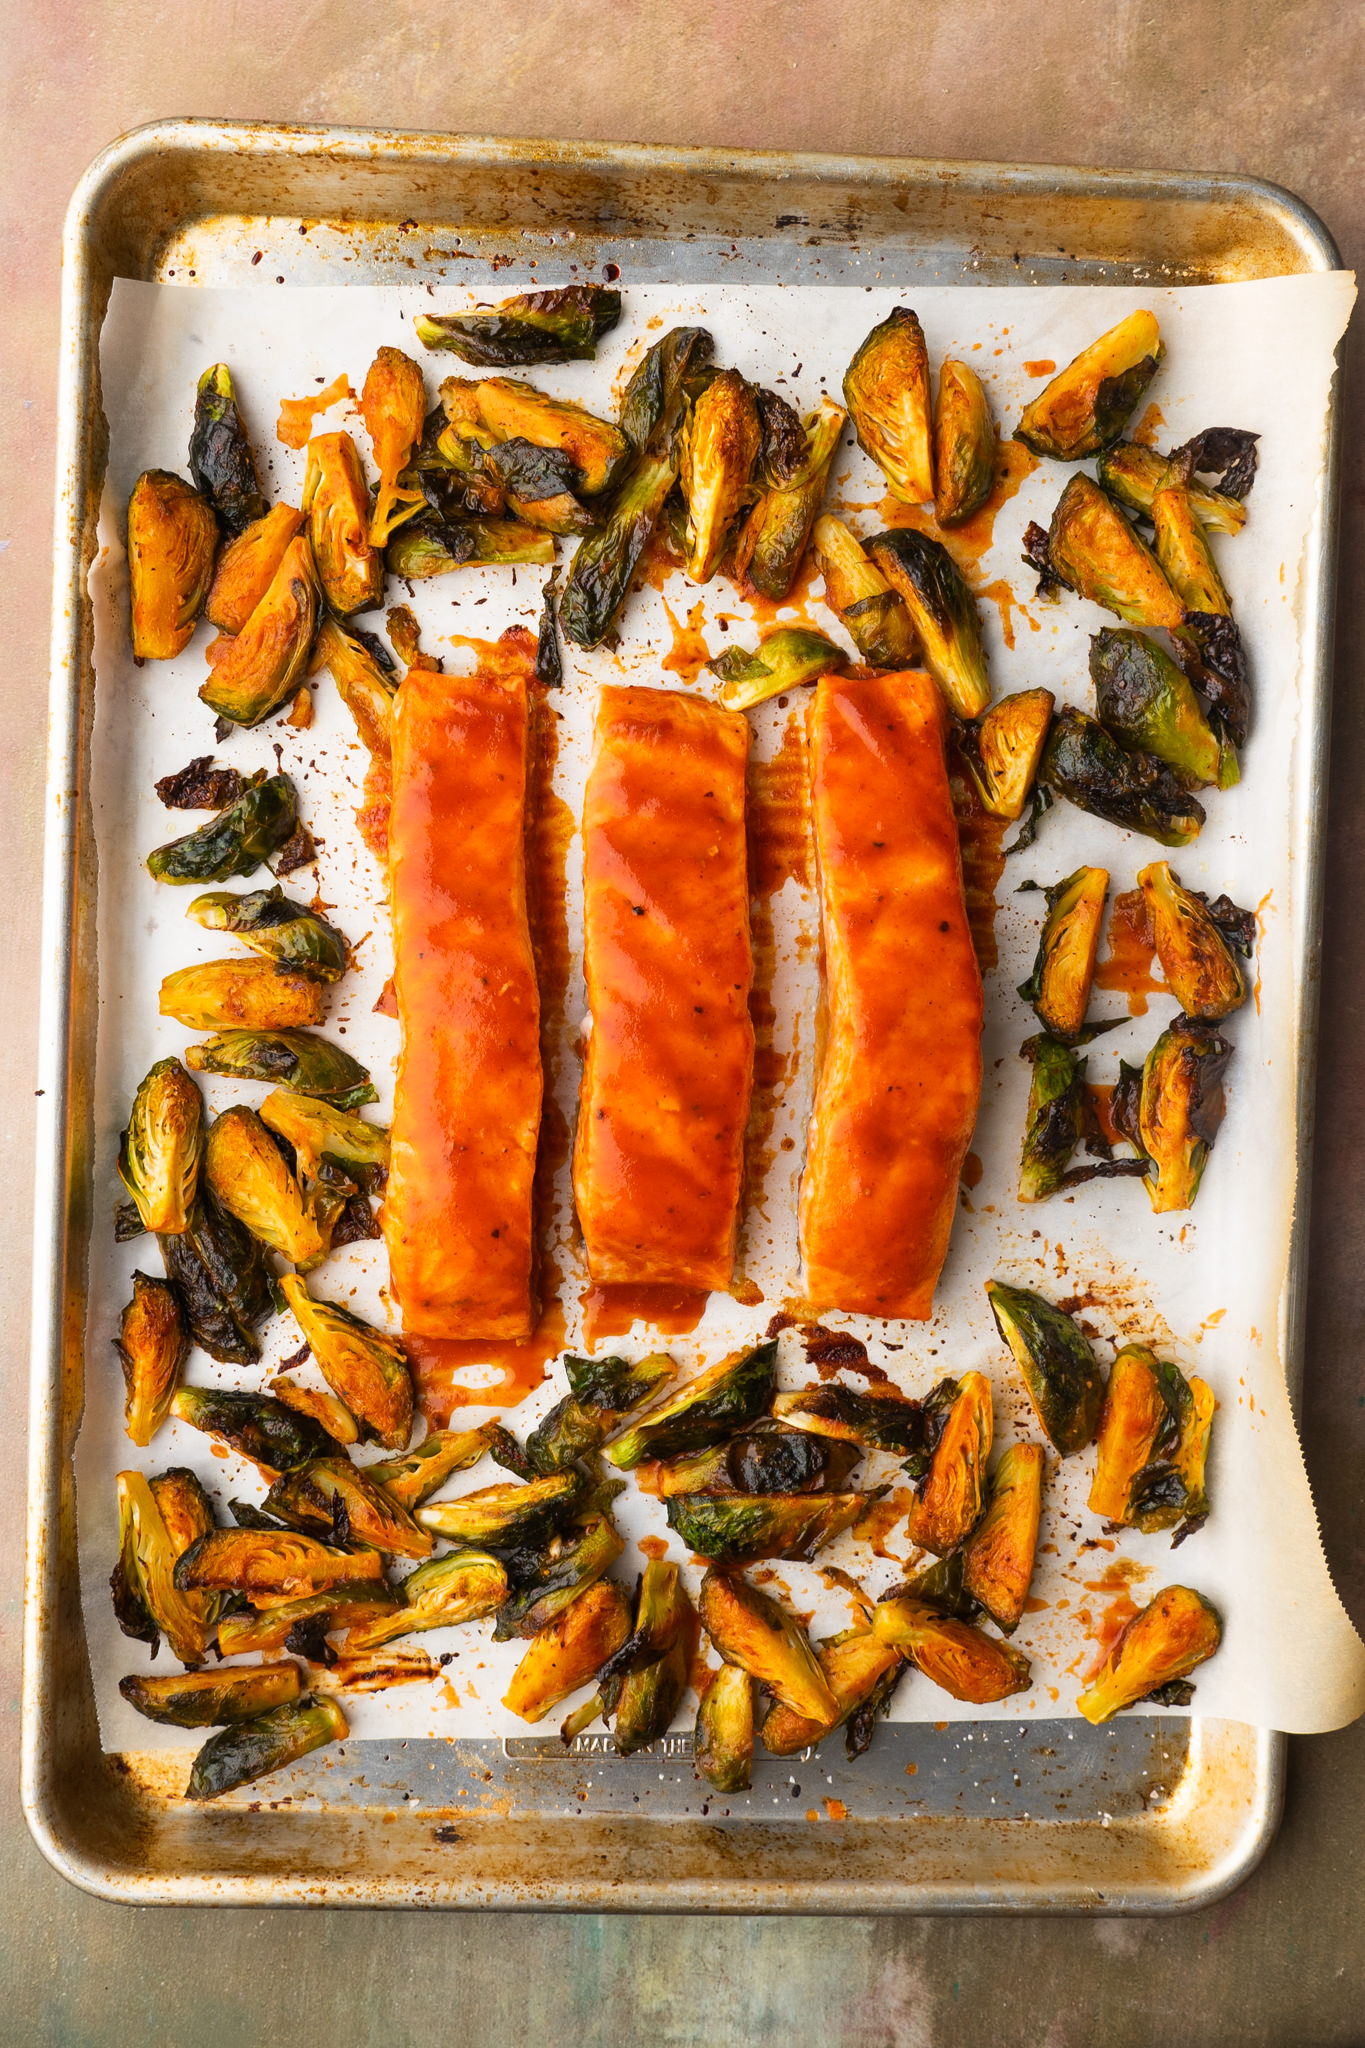 Baked bbq salmon with brussels sprouts